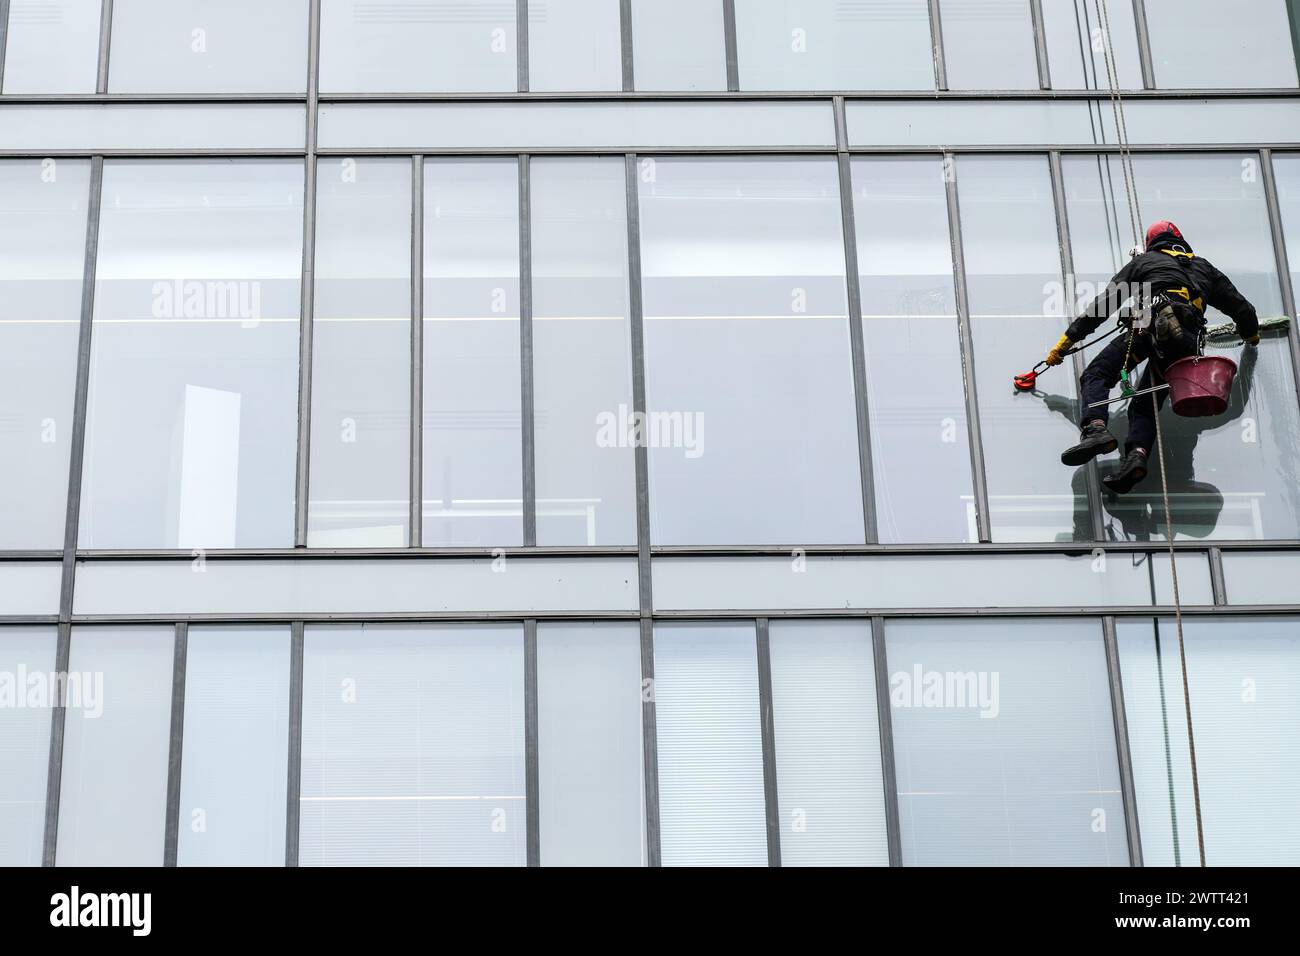 Window cleaners suspended on ropes clean the exterior windows of an office building in Glasgow, Scotland. Stock Photo